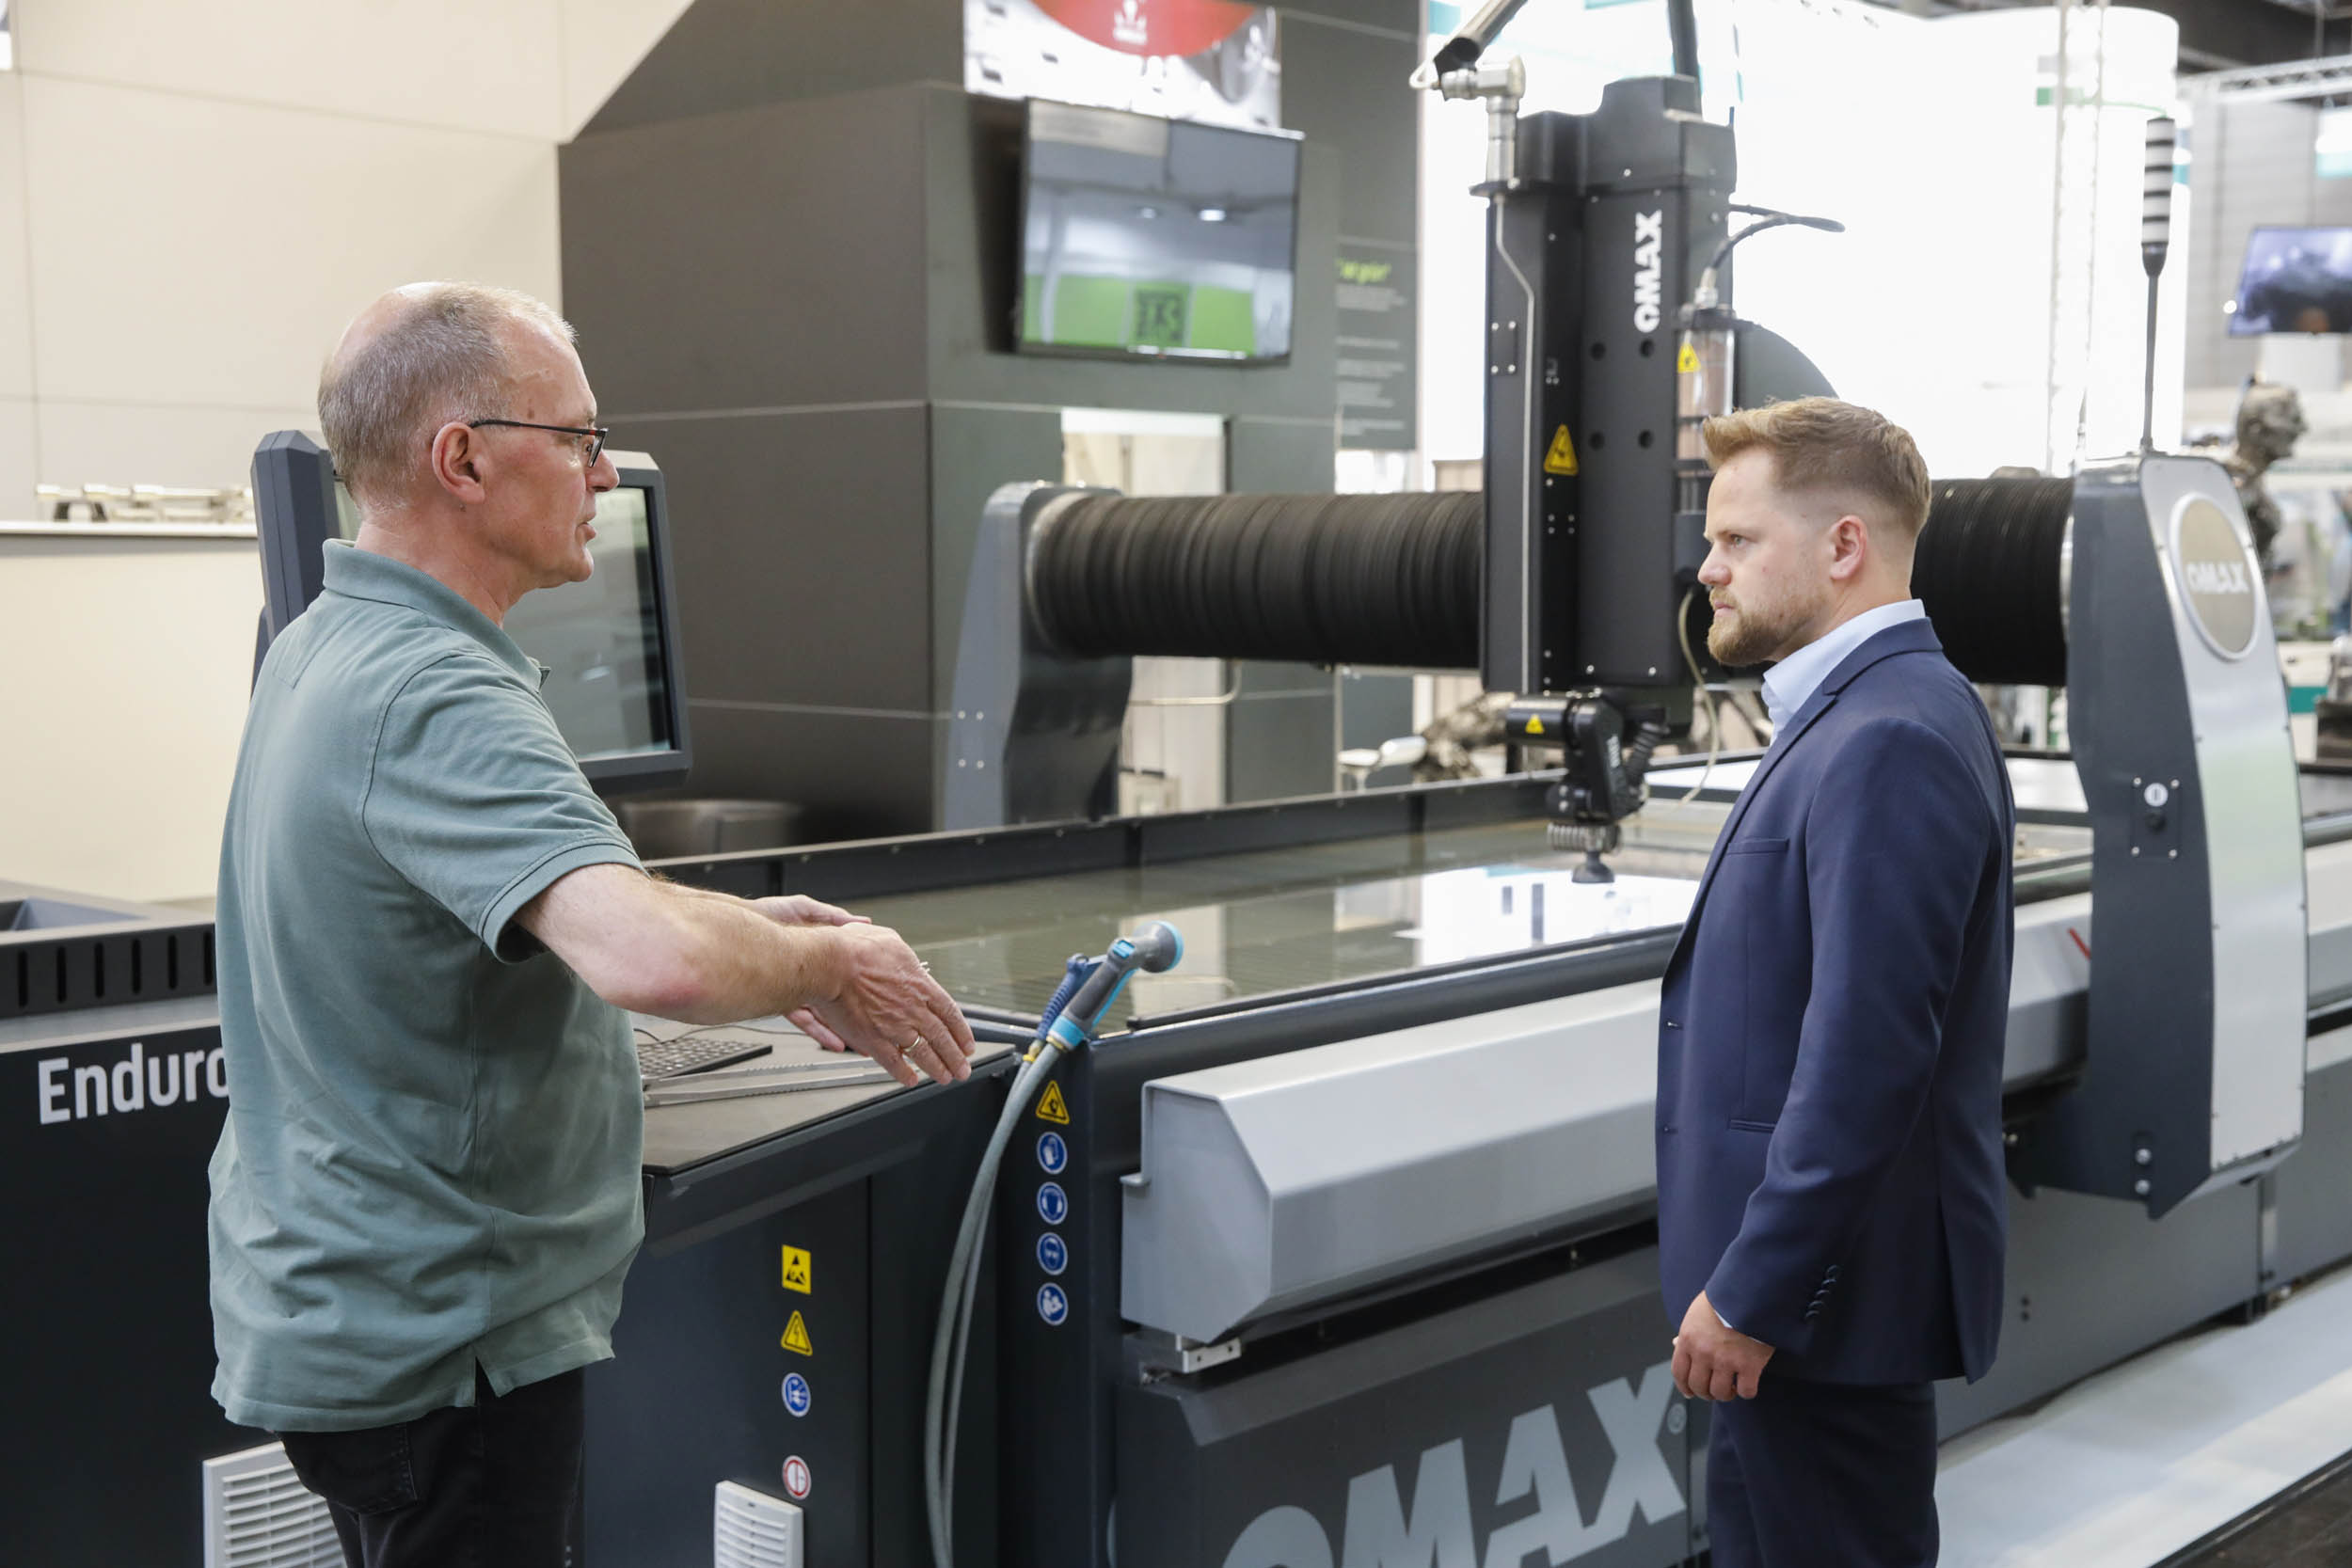 The moving head of the Omax OptiMAX 60X automatically compensates for the cone created by the waterjet, enabling high-precision waterjet cutting and the production of precise small angles in contours.